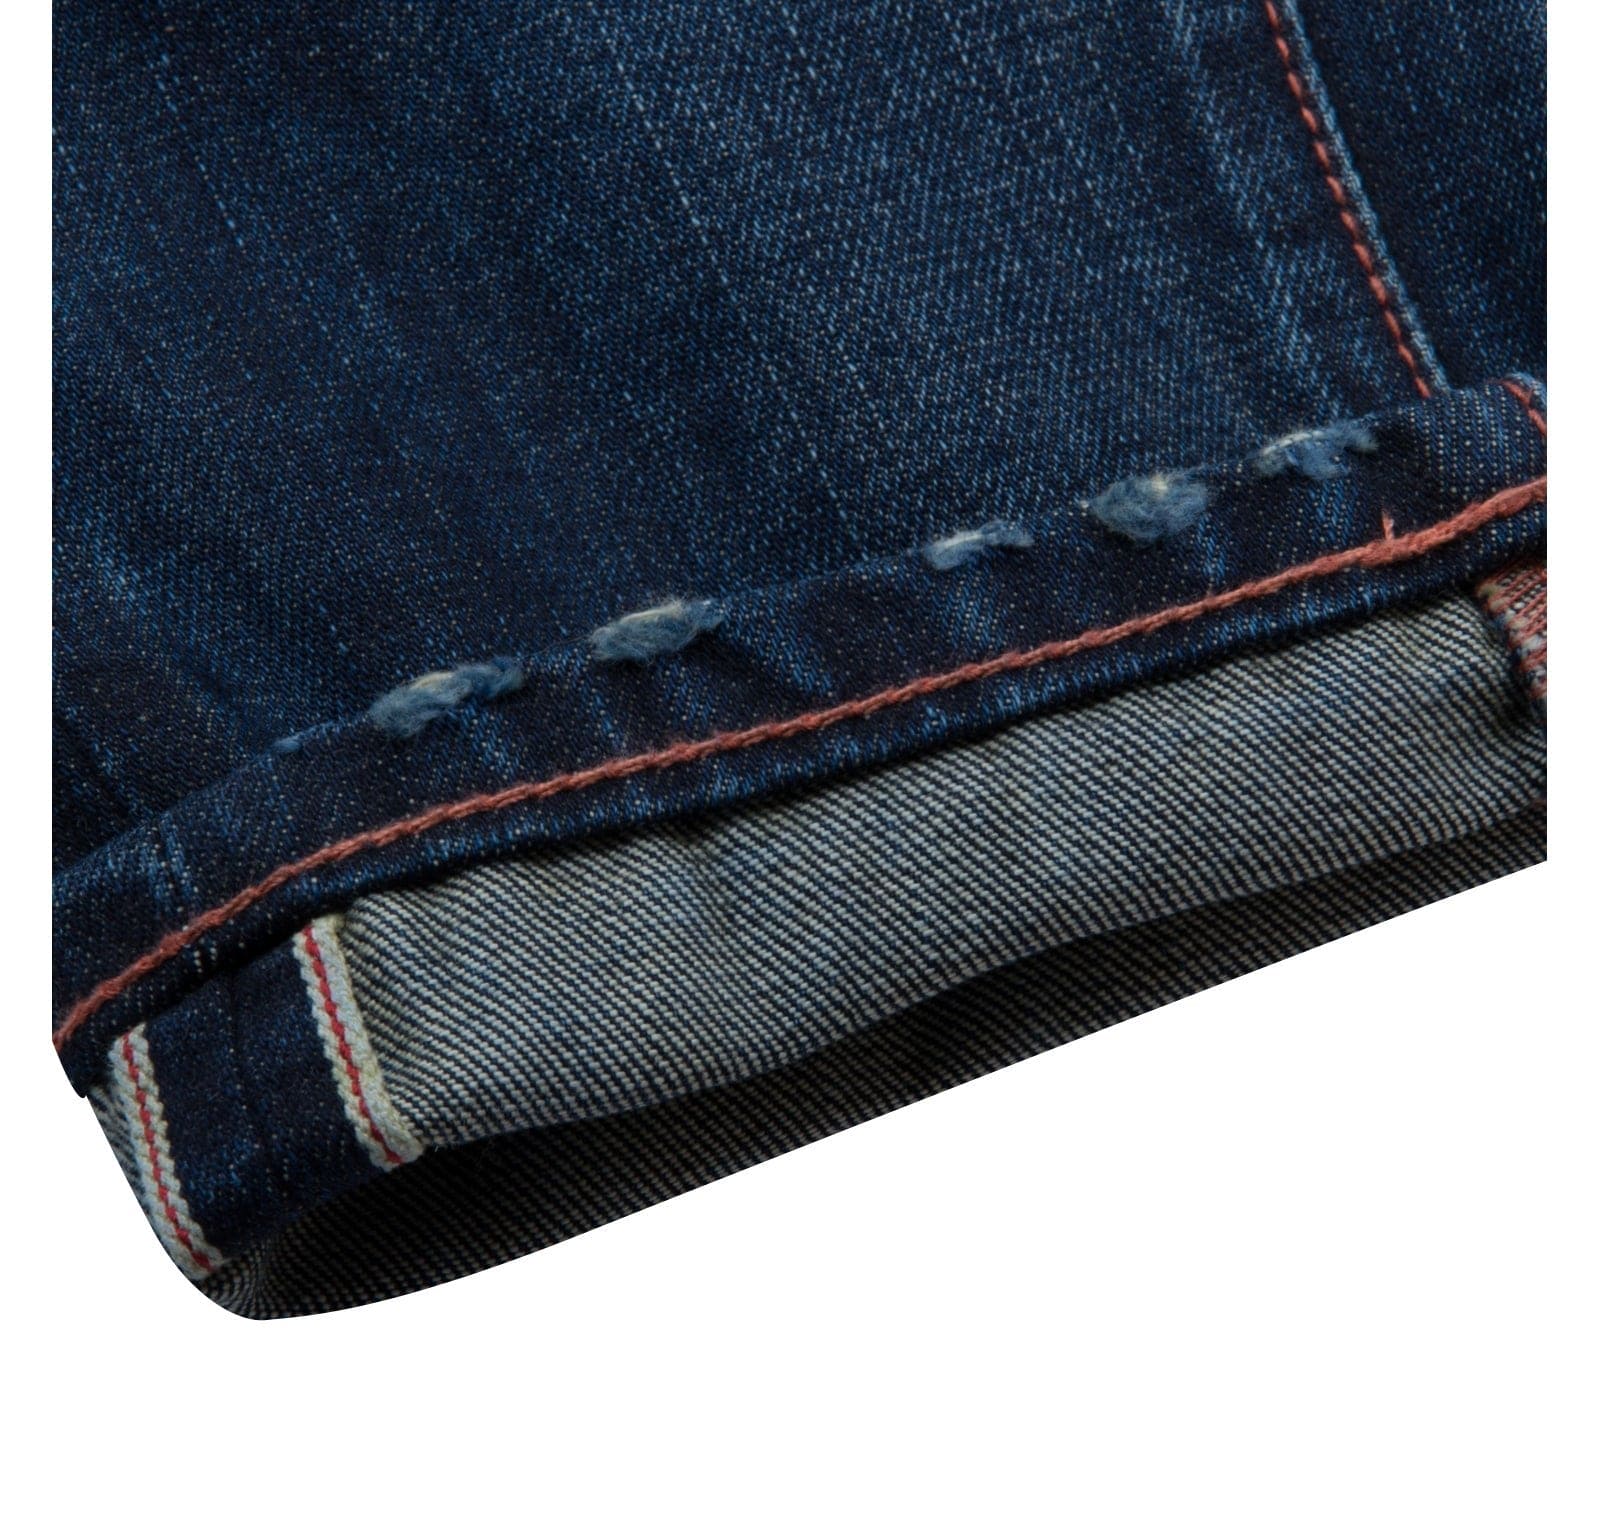 Tom Ripe Athletic Selvedge Jeans - All Weather Selvedge